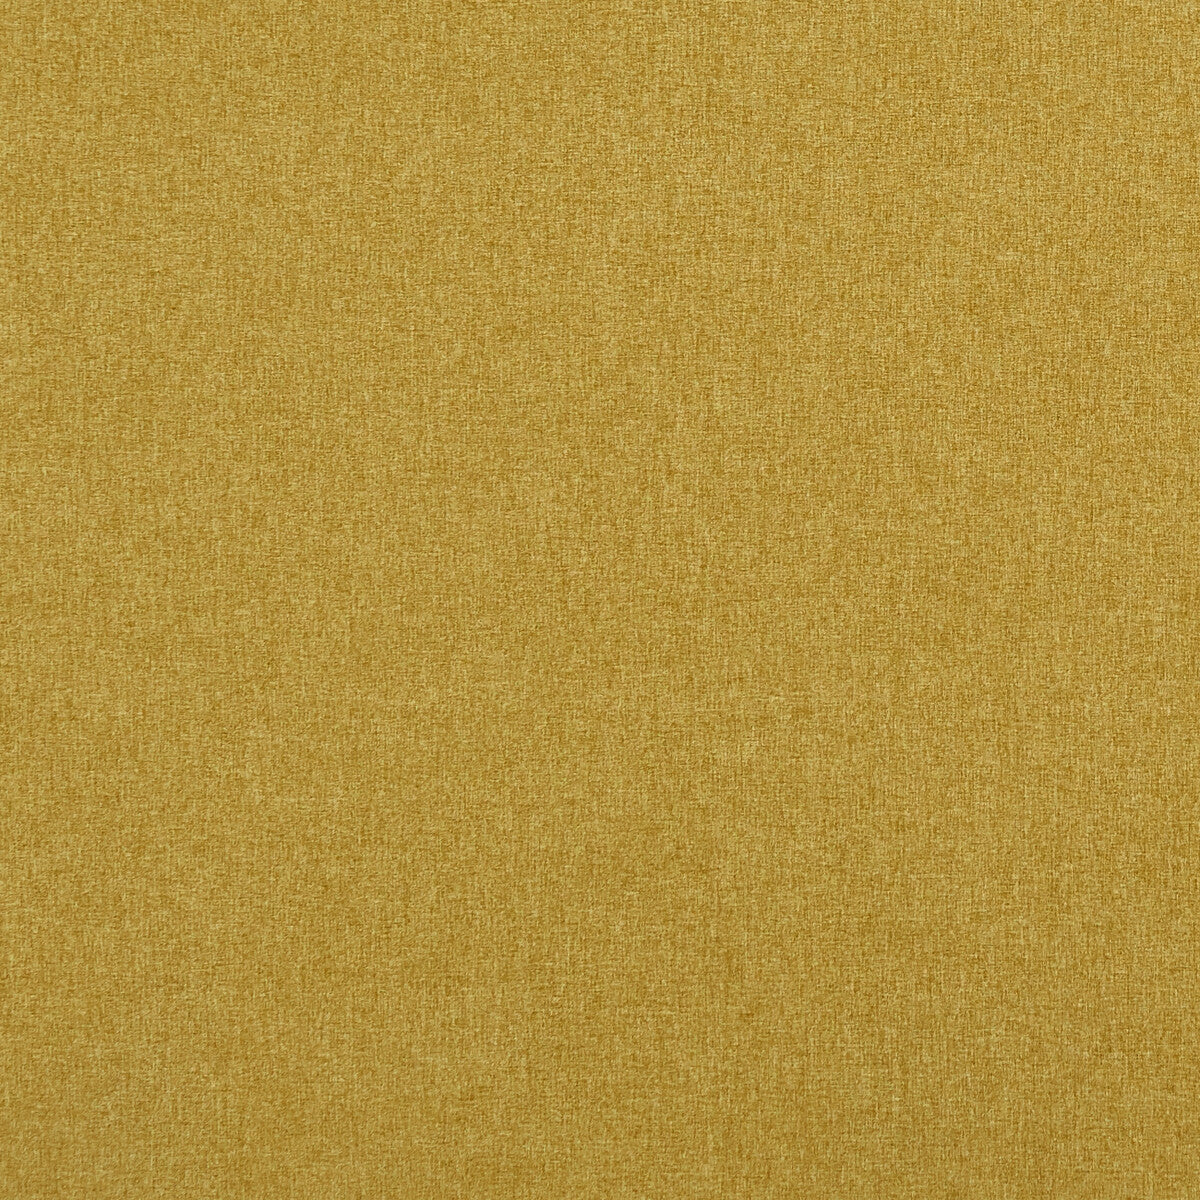 Highlander fabric in gold color - pattern F0848/15.CAC.0 - by Clarke And Clarke in the Clarke &amp; Clarke Highlander collection